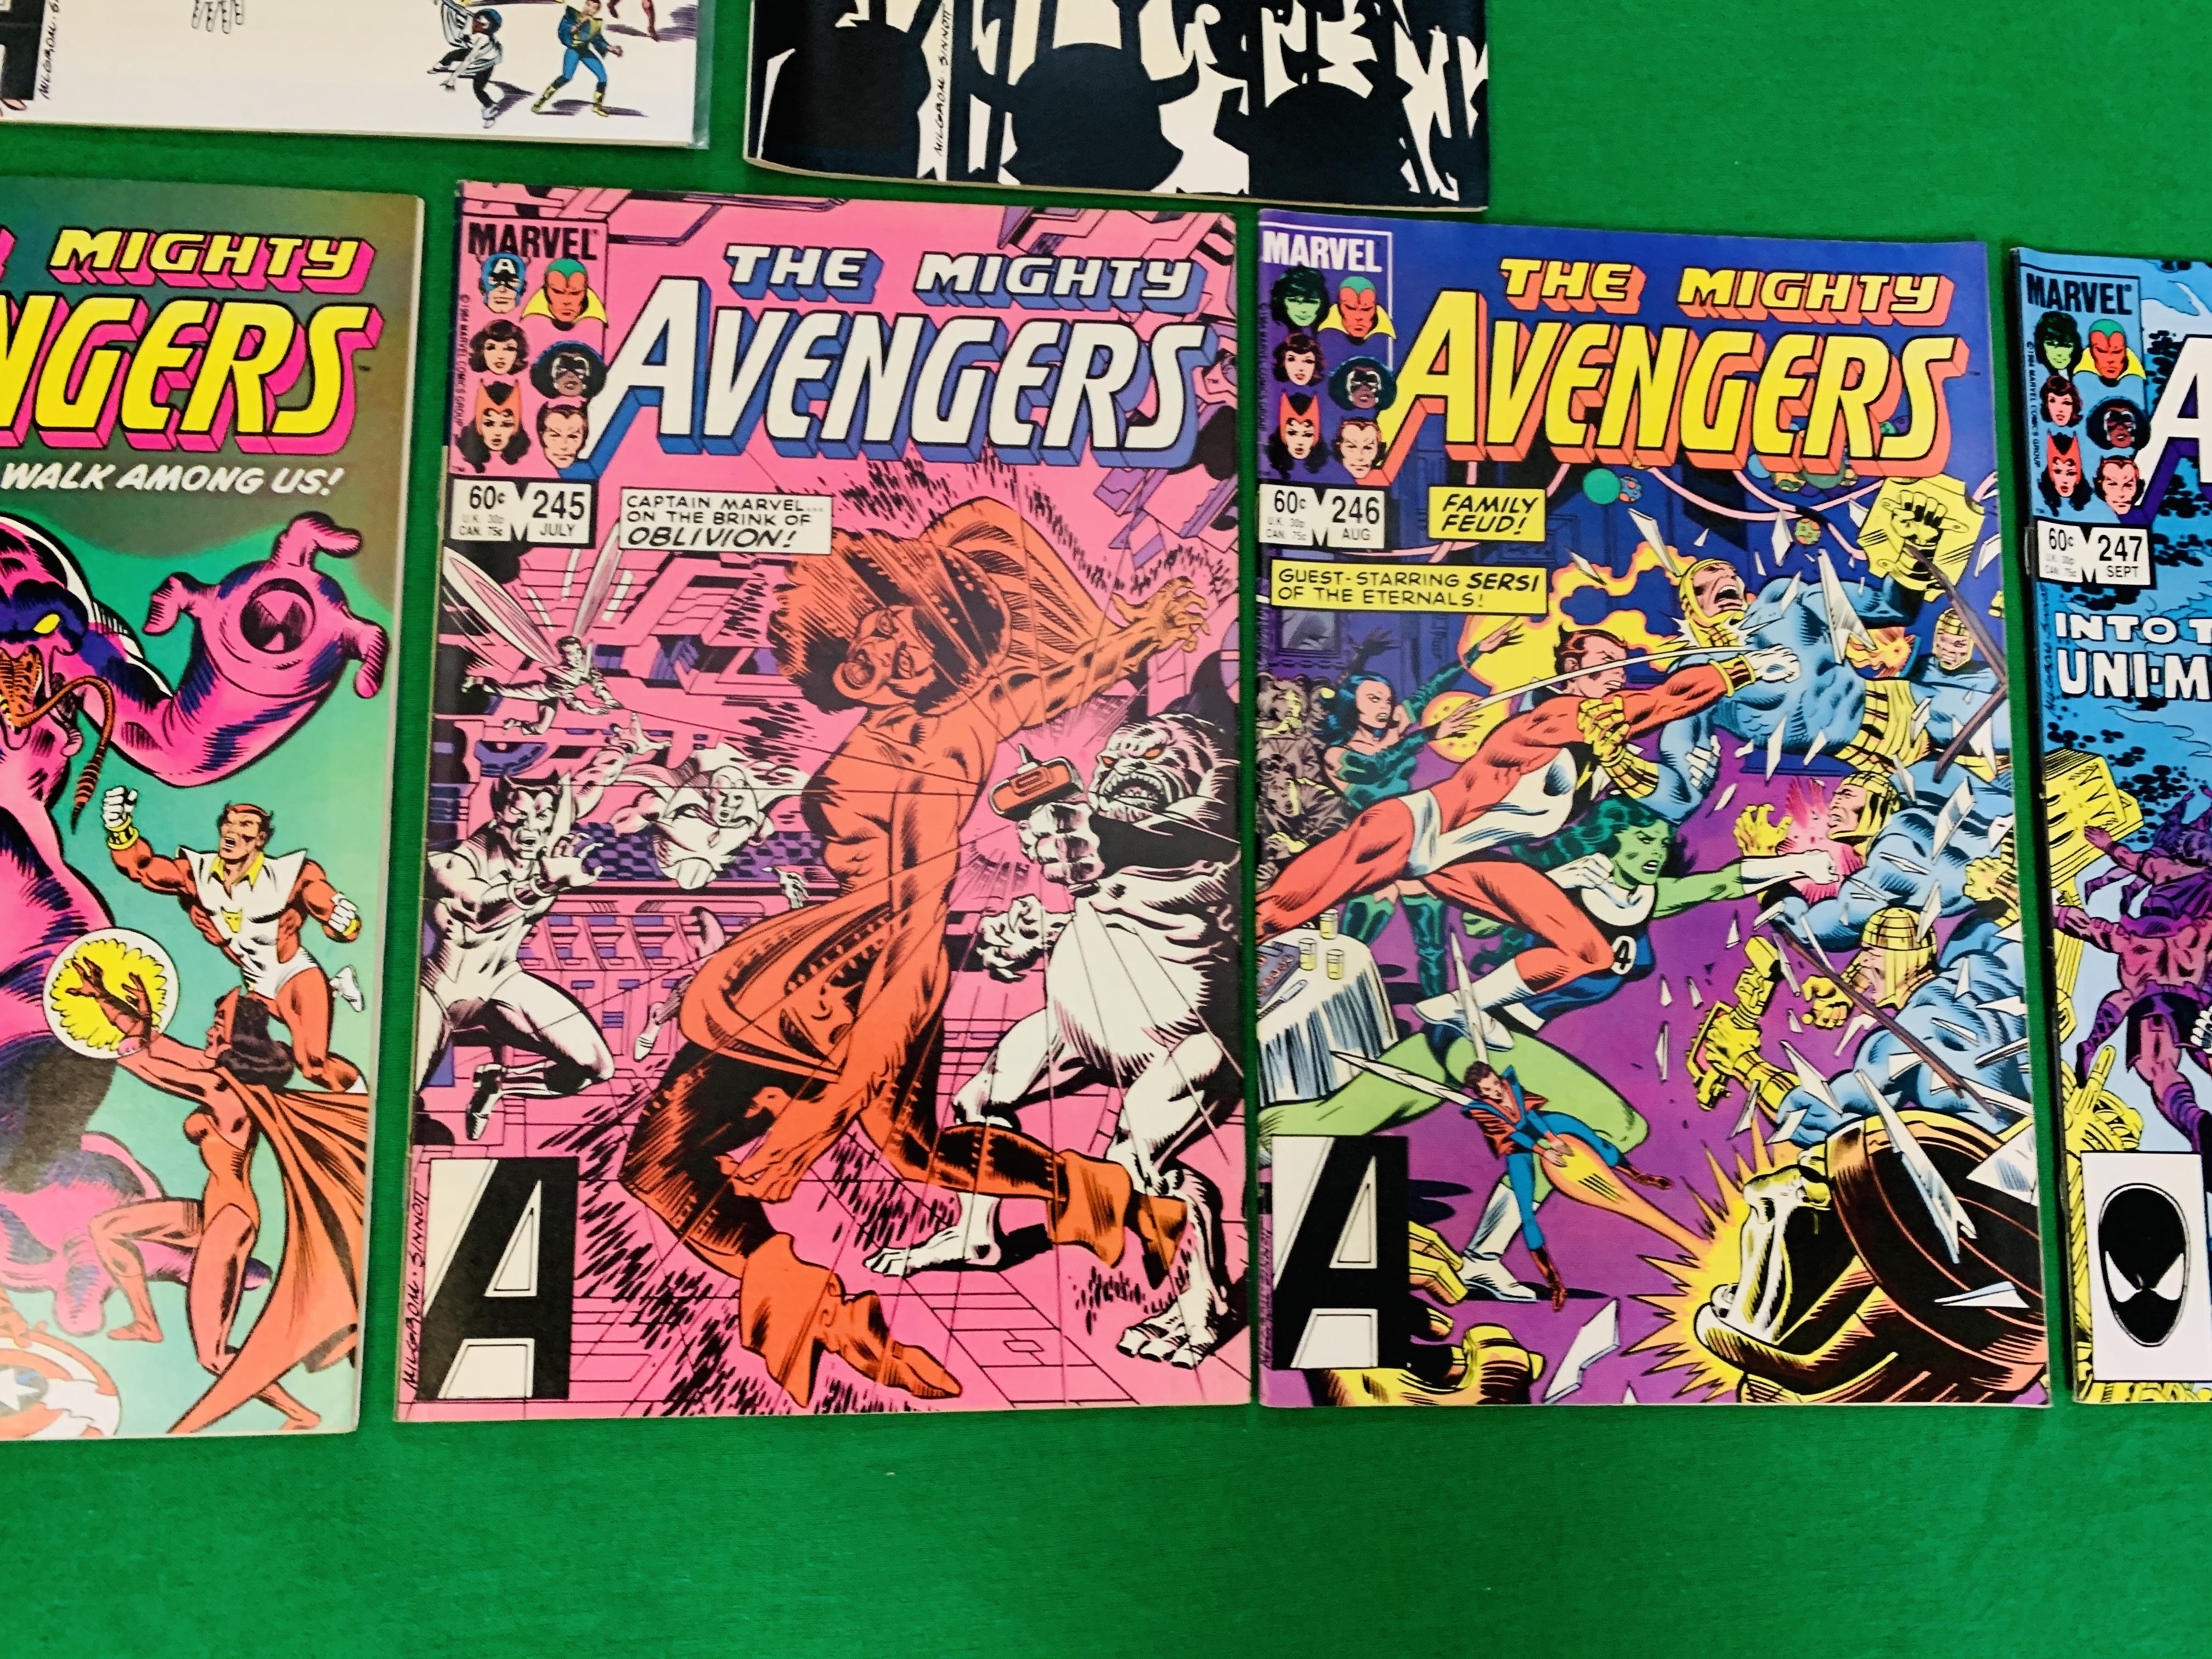 MARVEL COMICS THE AVENGERS NO. 101 - 299, MISSING ISSUES 103 AND 110. - Image 101 of 130